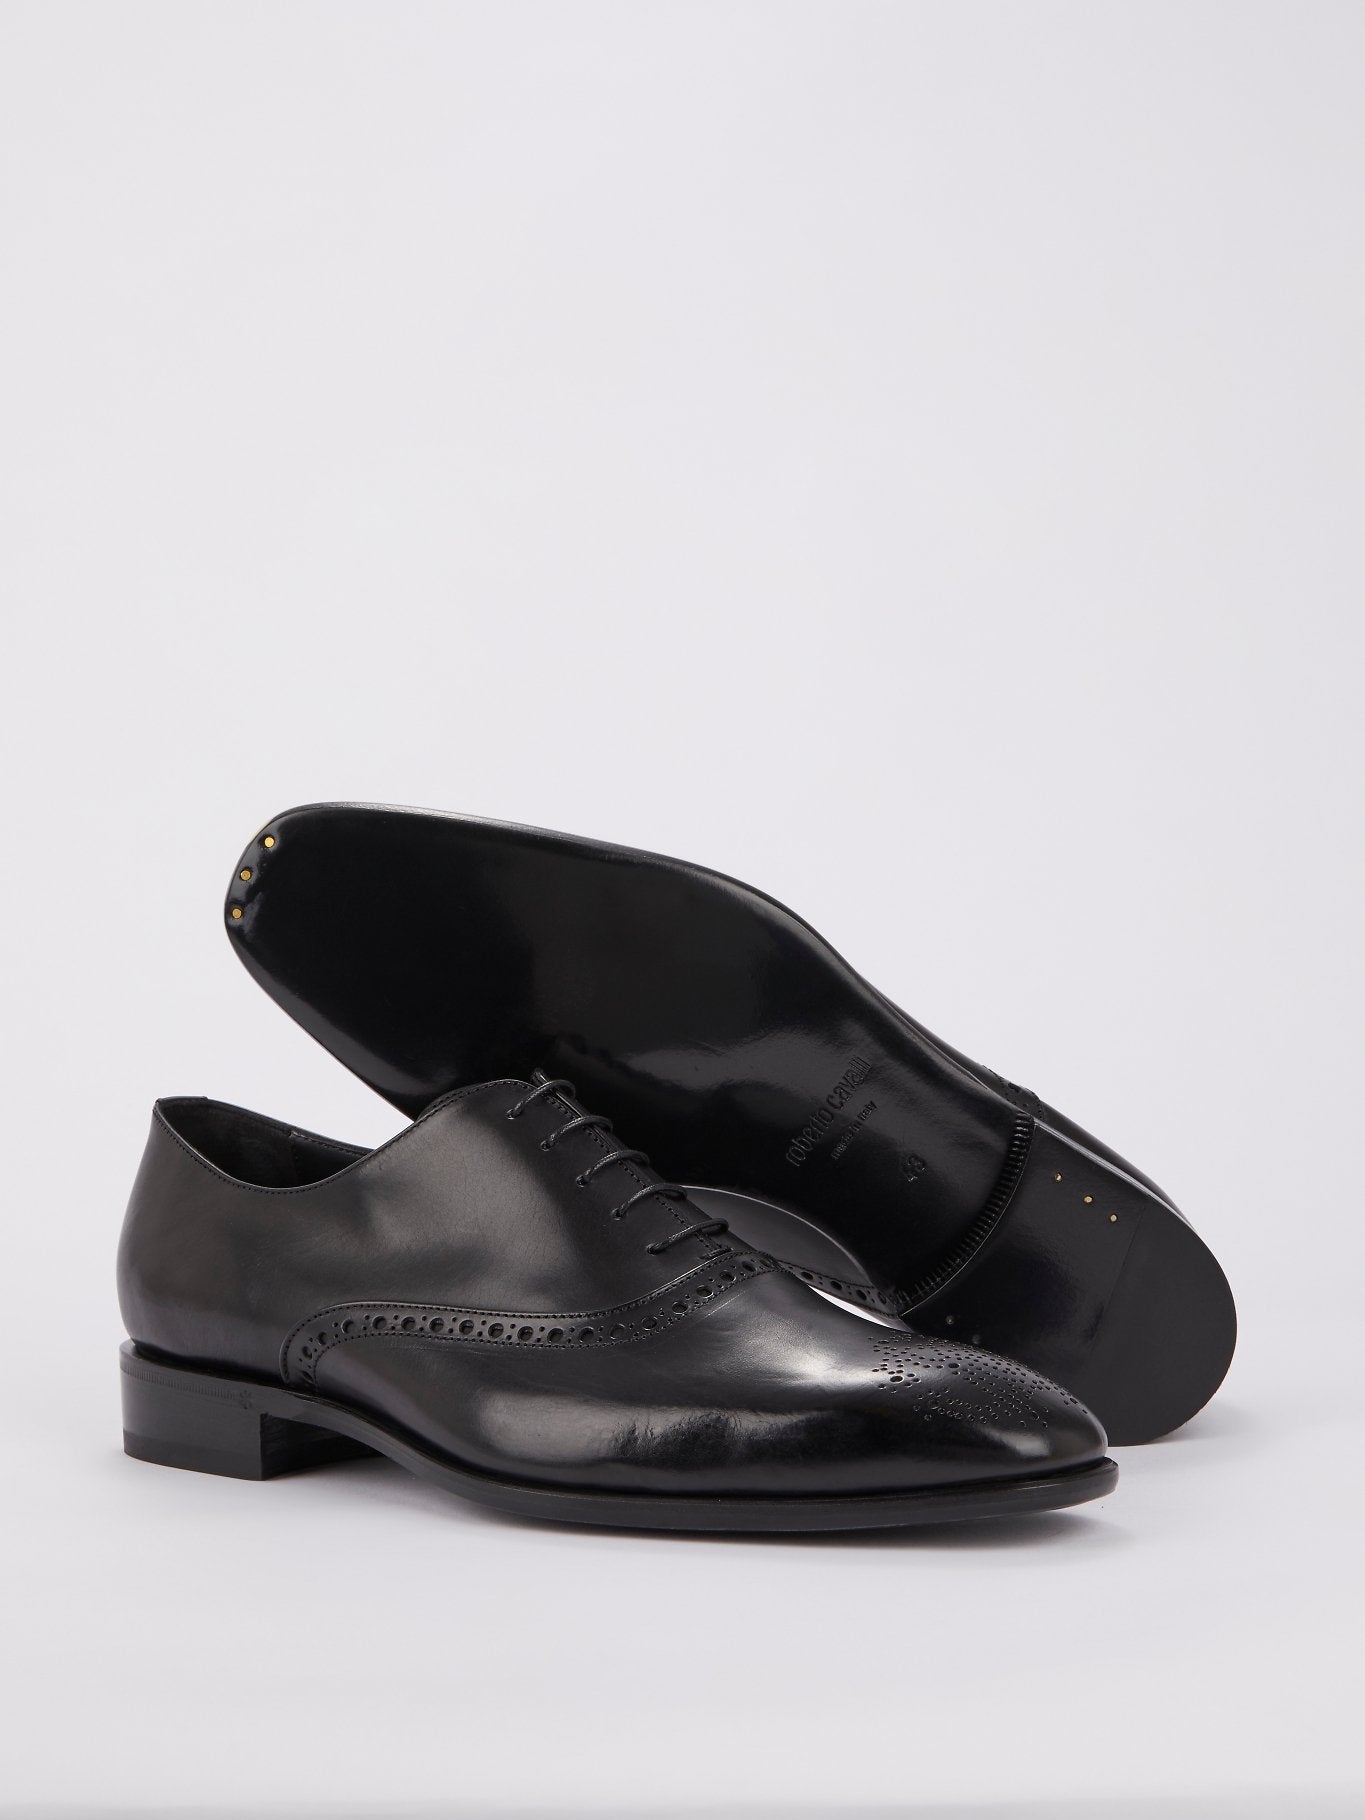 Black Perforated Oxford Shoes